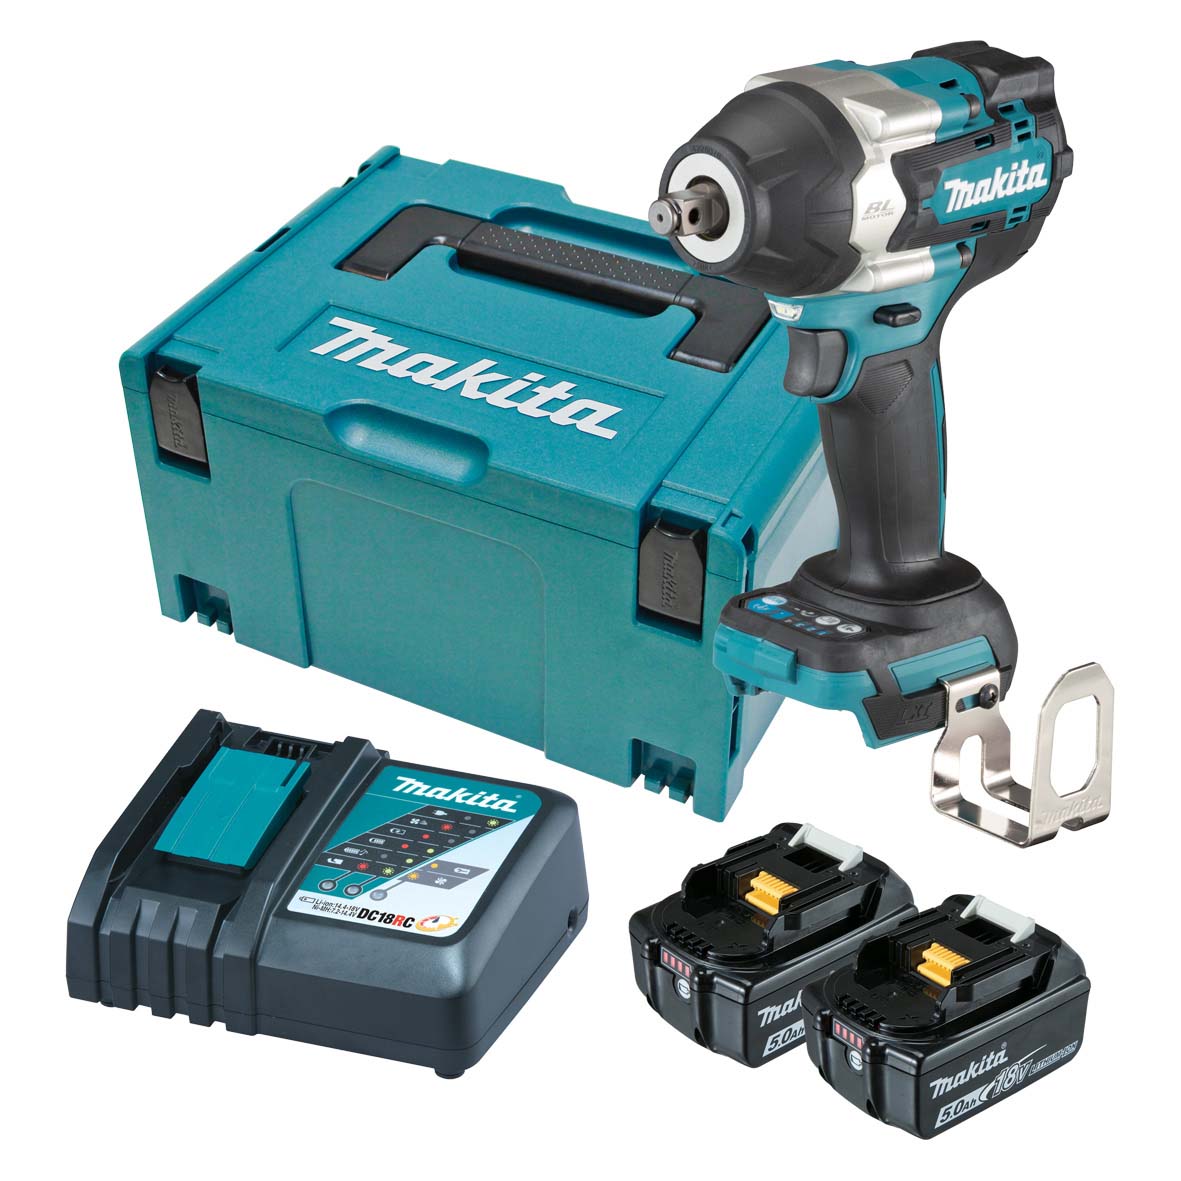 18V 1/2" Brushless Impact Wrench Kit DTW700RTJ by Makita